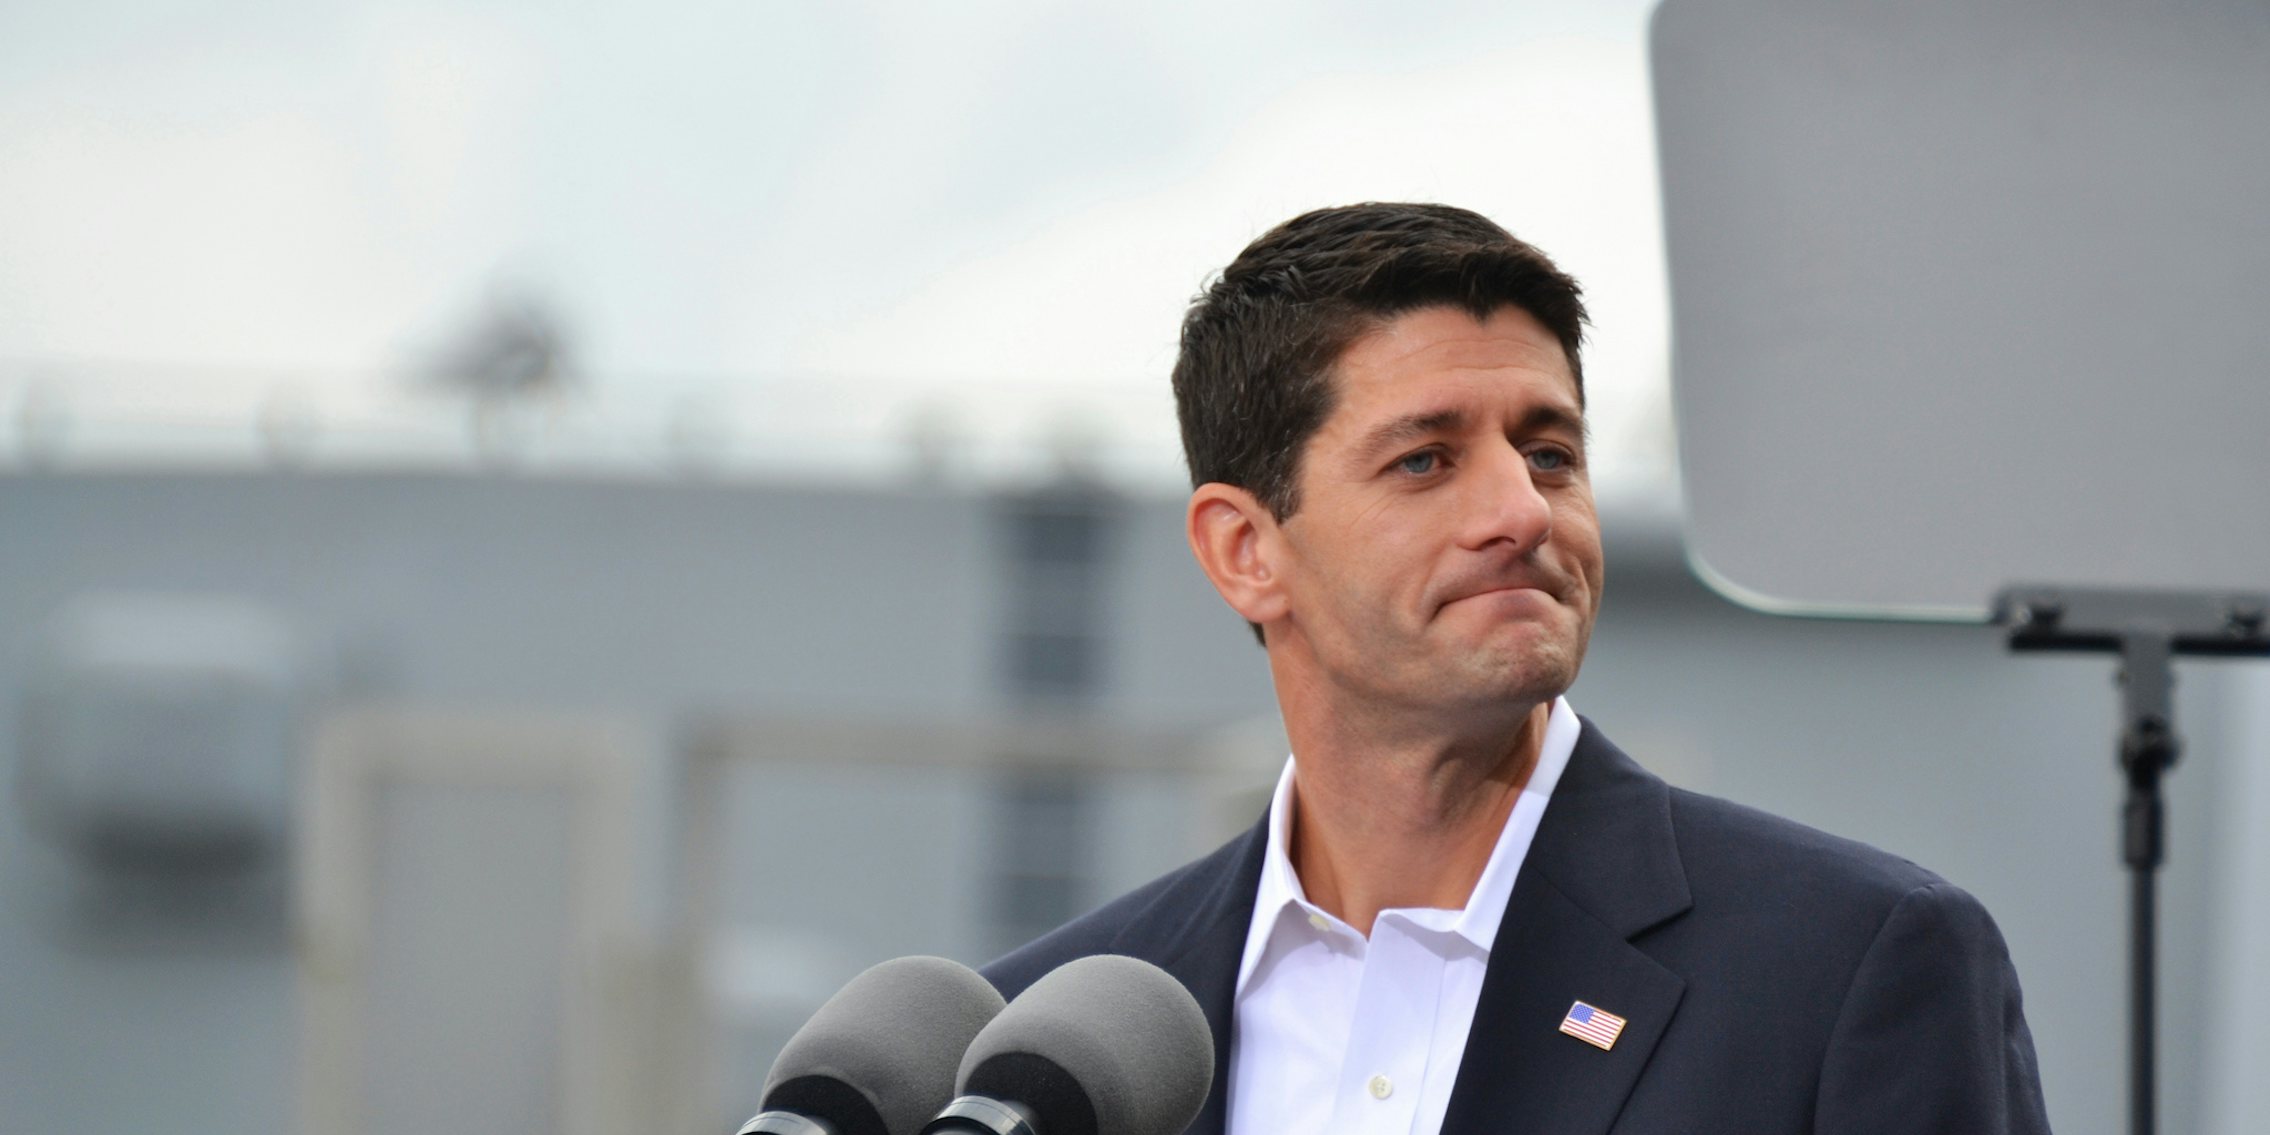 Paul Ryan Won't Seek Reelection in 2018, Will Leave House in January